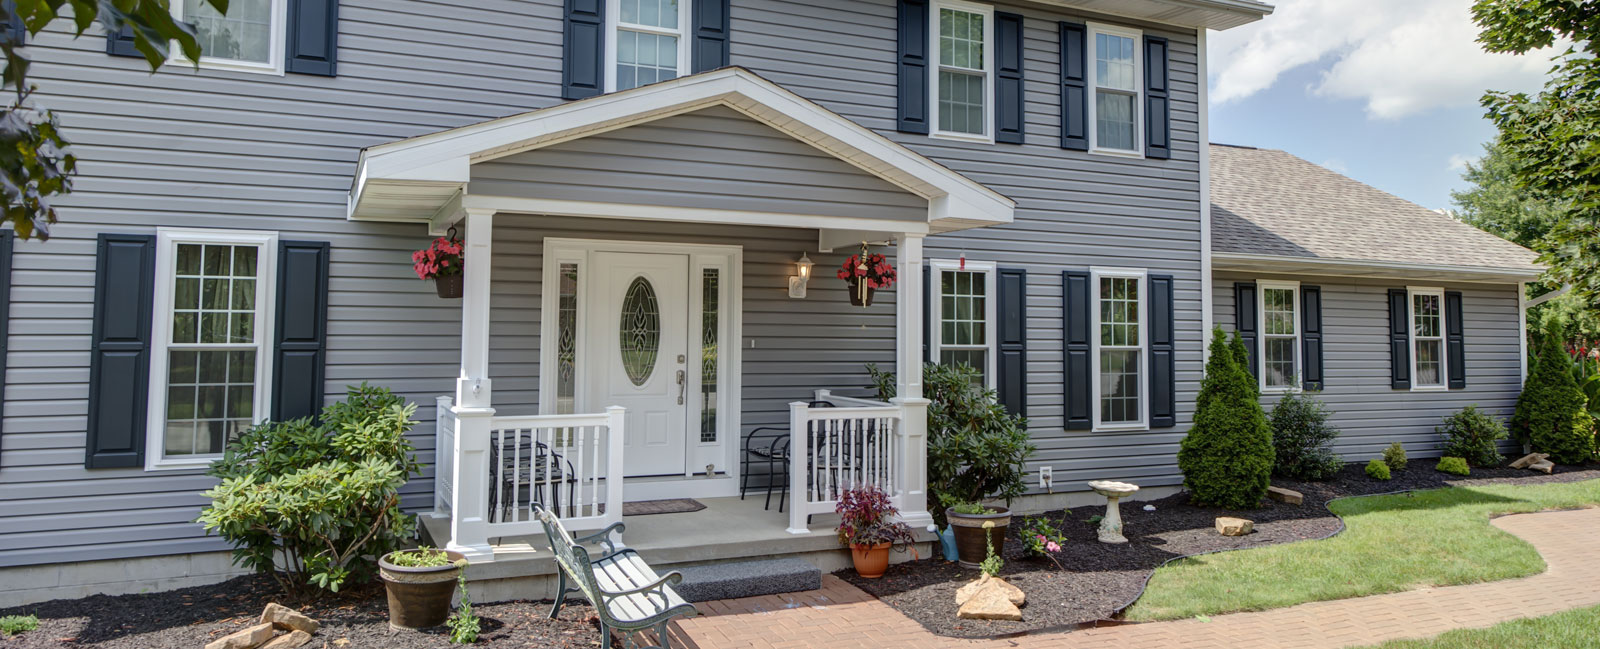 Window Installation, Vinyl Siding and Roofing Services CT | SCI Windows